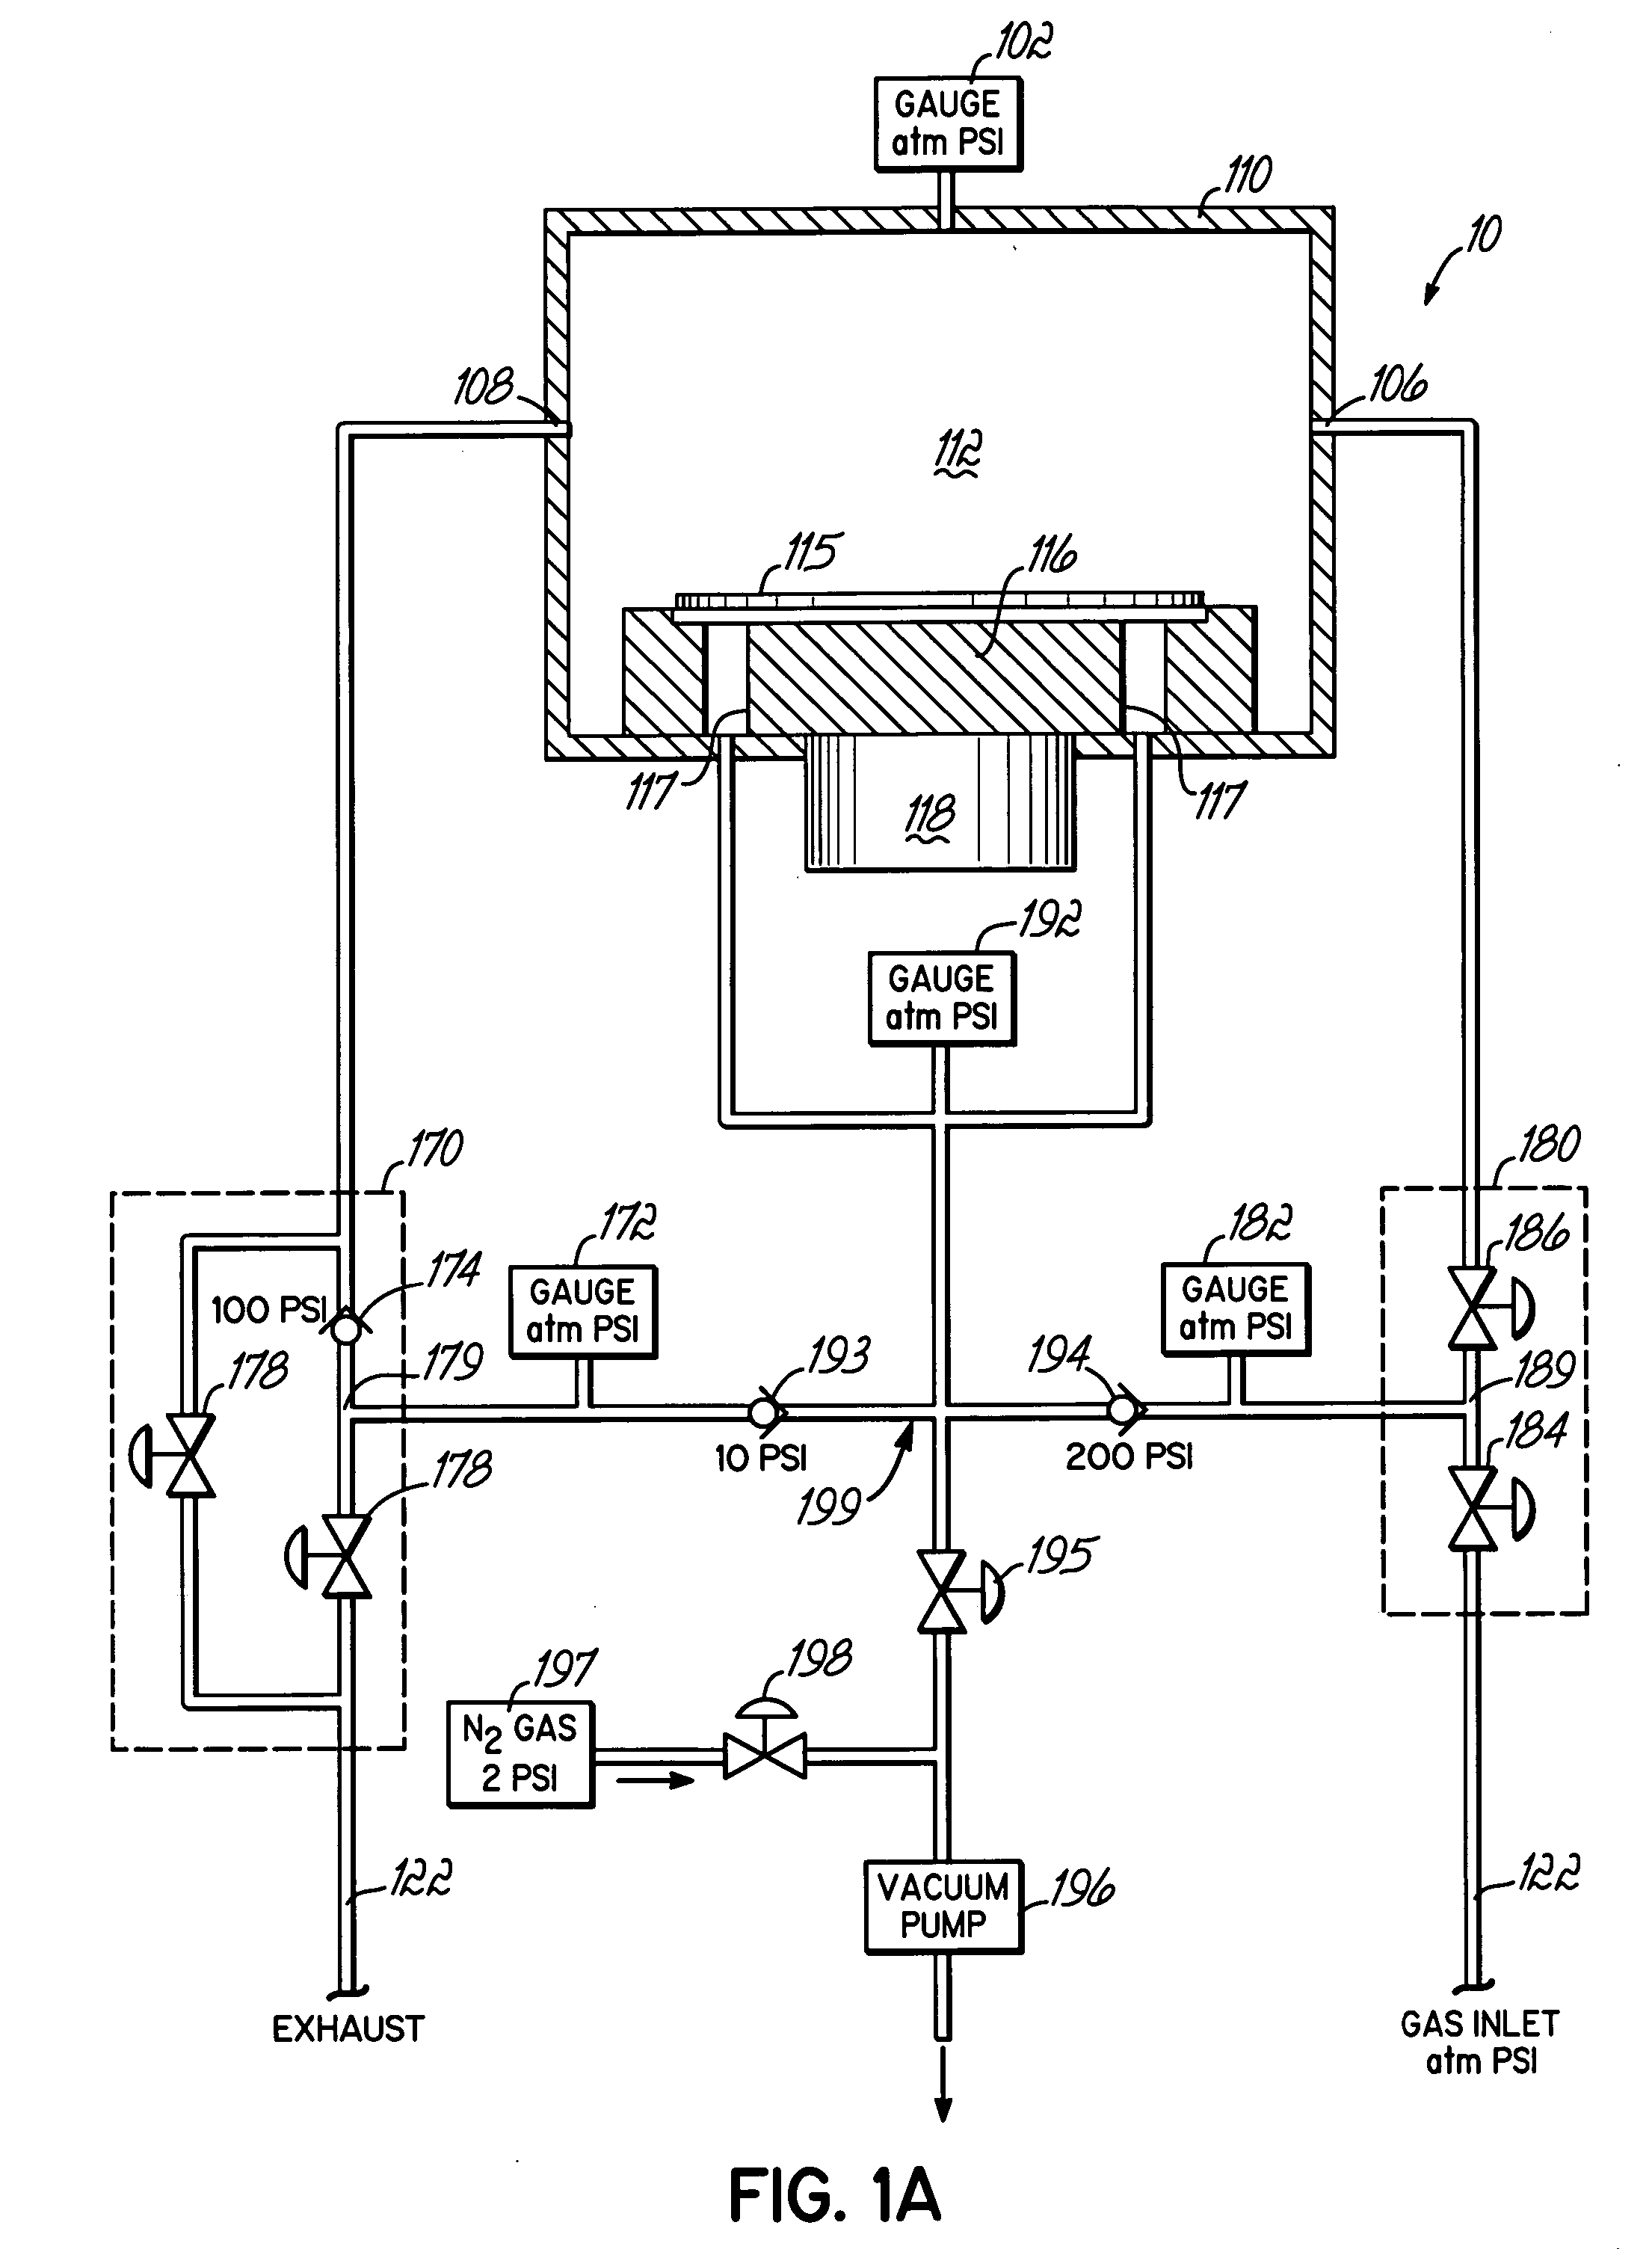 Method and apparatus for clamping a substrate in a high pressure processing system